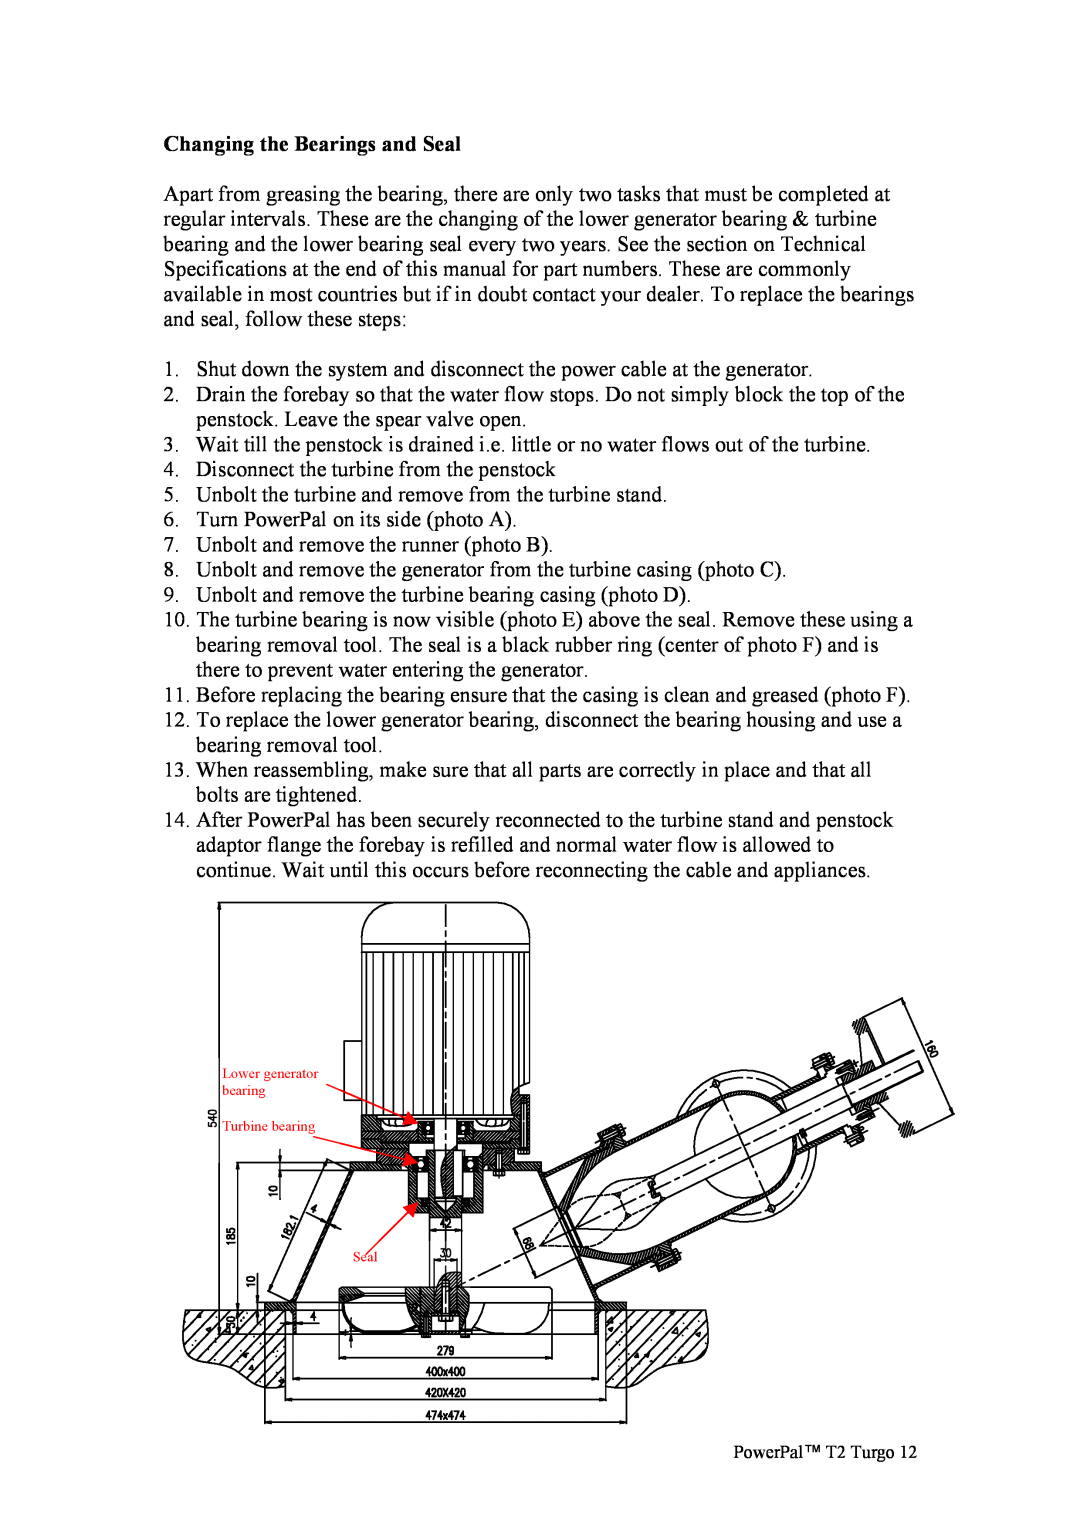 Asian Resources Int'l Limited MHG-T2 manual Changing the Bearings and Seal 